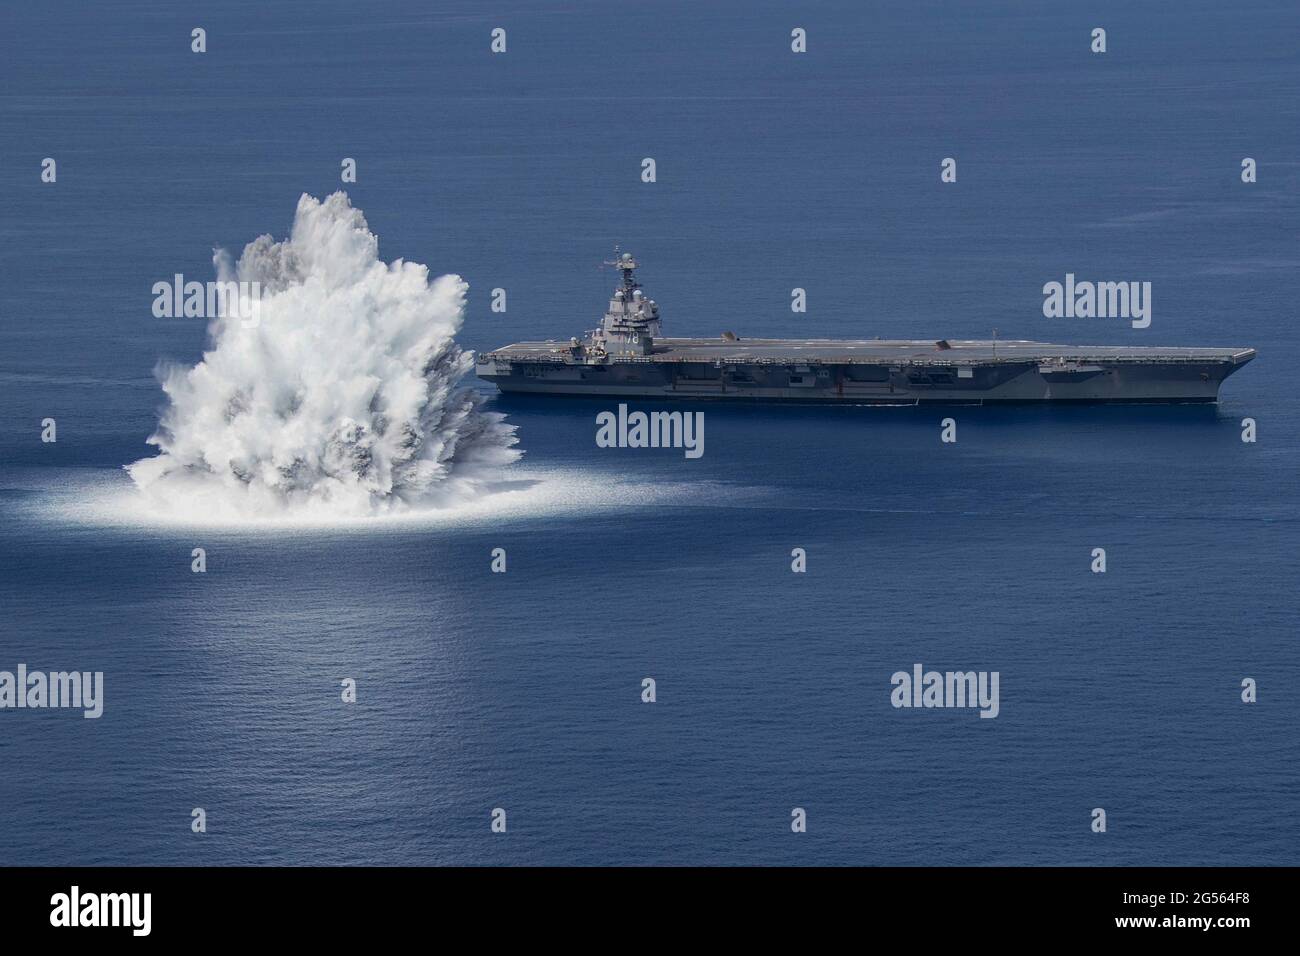 The U.S. Navy USS Gerald R. Ford, lead ship in the Ford Class Aircraft Carriers, completes the first scheduled explosive event of Full Ship Shock Trials while underway June 18, 2021 in the Atlantic Ocean. The U.S. Navy conducts shock trials of new ship designs using live explosives to confirm performance in battle conditions. Stock Photo